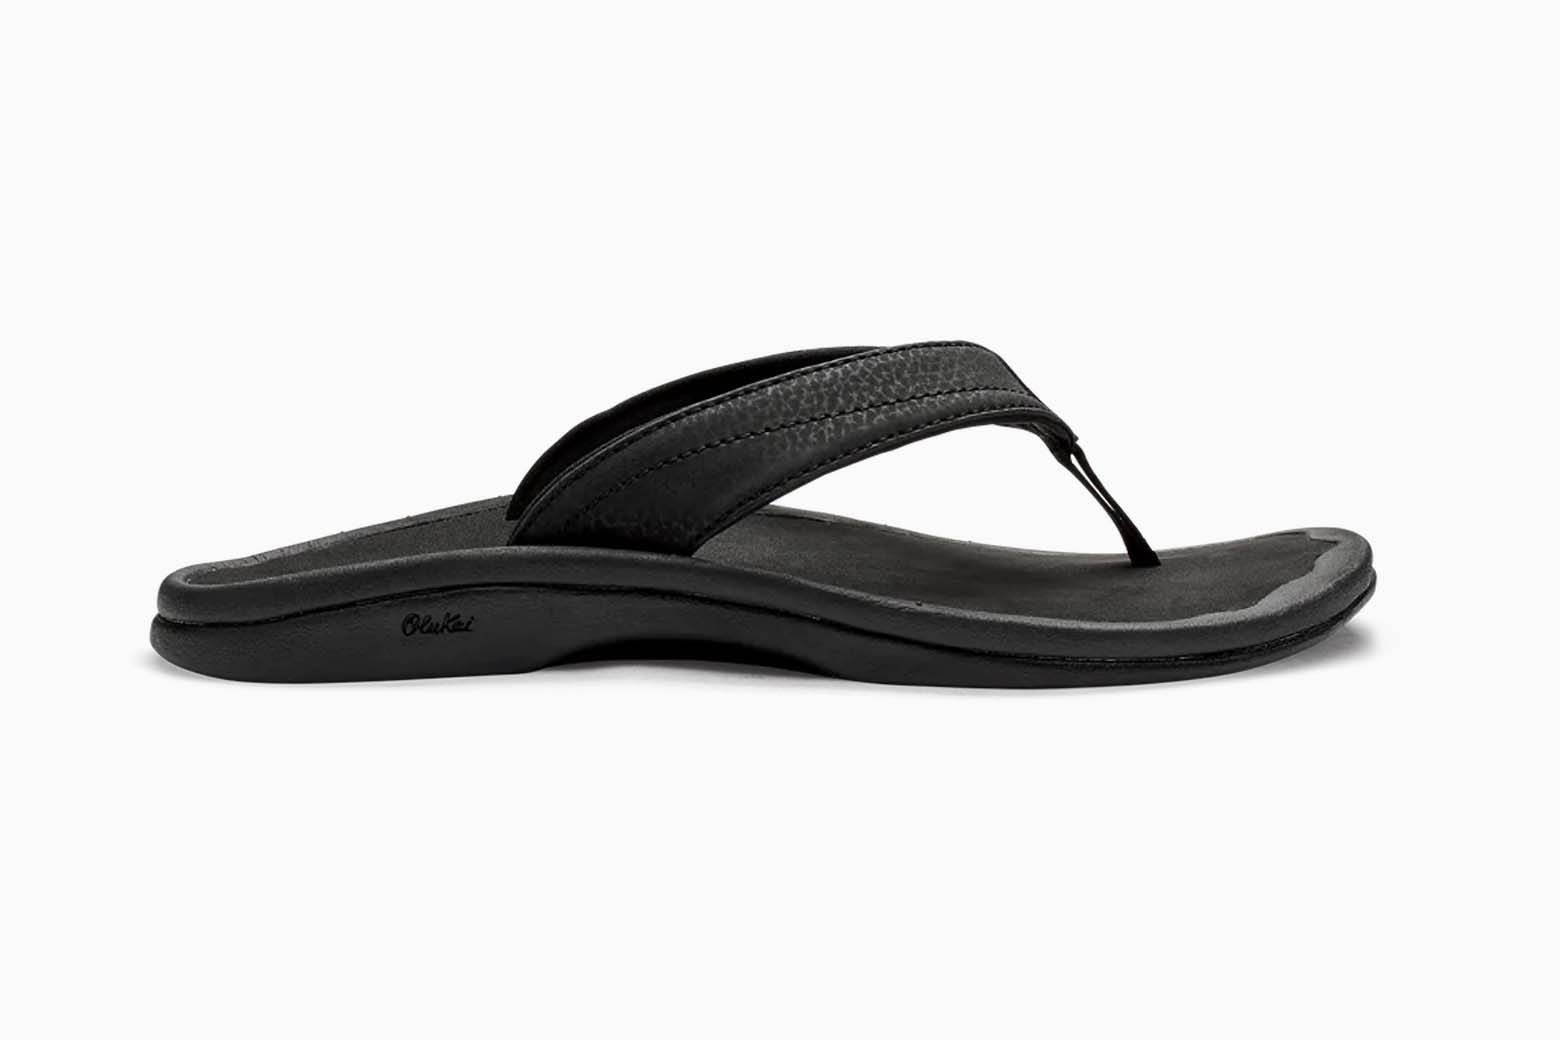 15 Most Comfortable Flip Flops For Women Style And Support